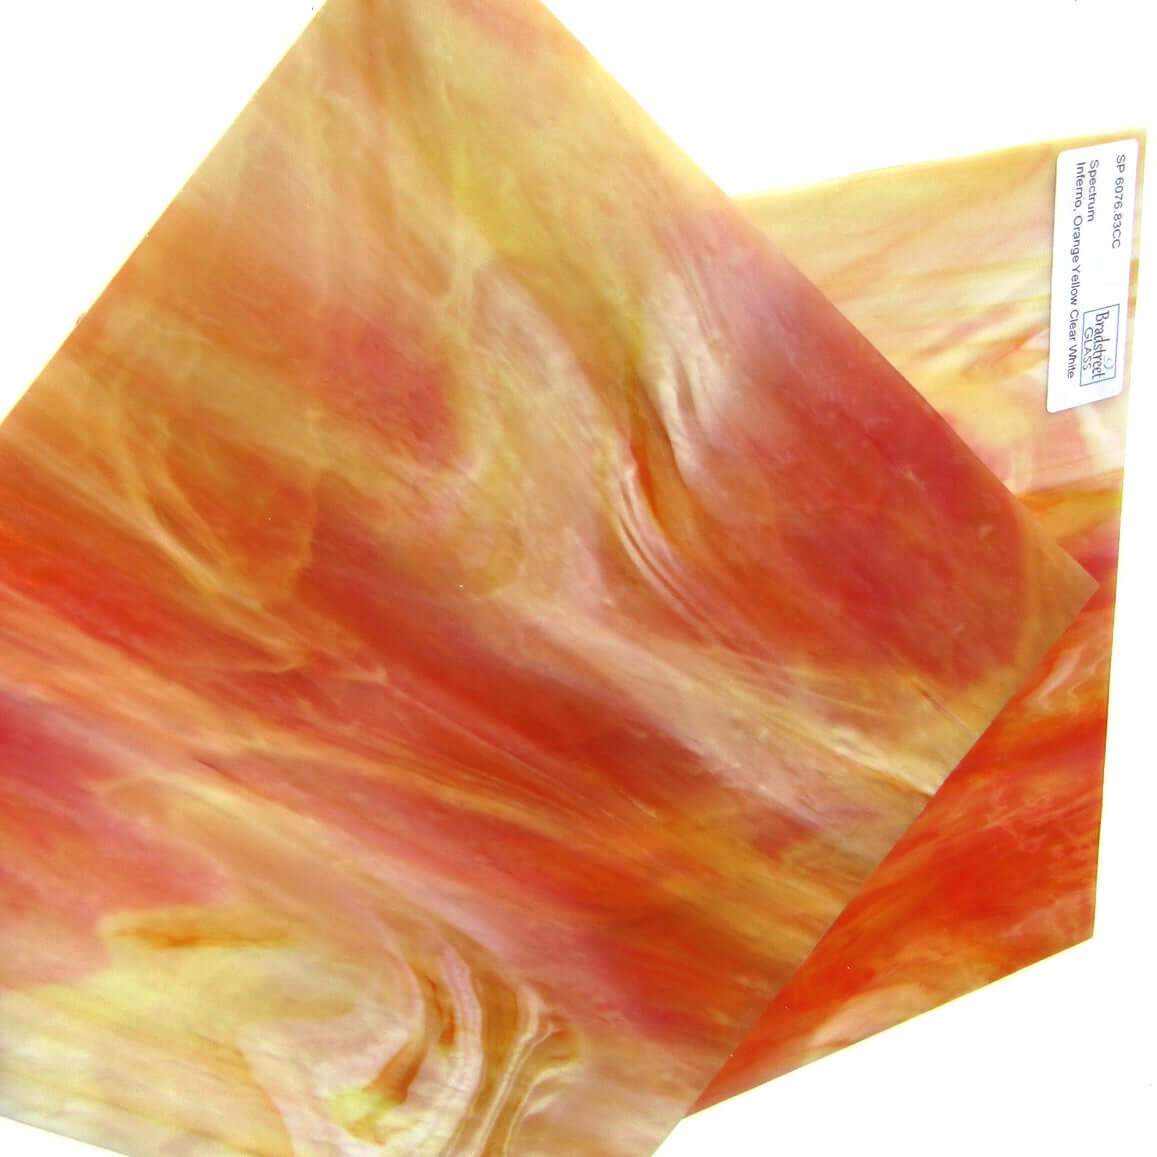 Spectrum 6076.83CC Inferno Pearl Opal Stained Glass Sheet Opaque Ripple Textured Orange Yellow Clear White Pearl